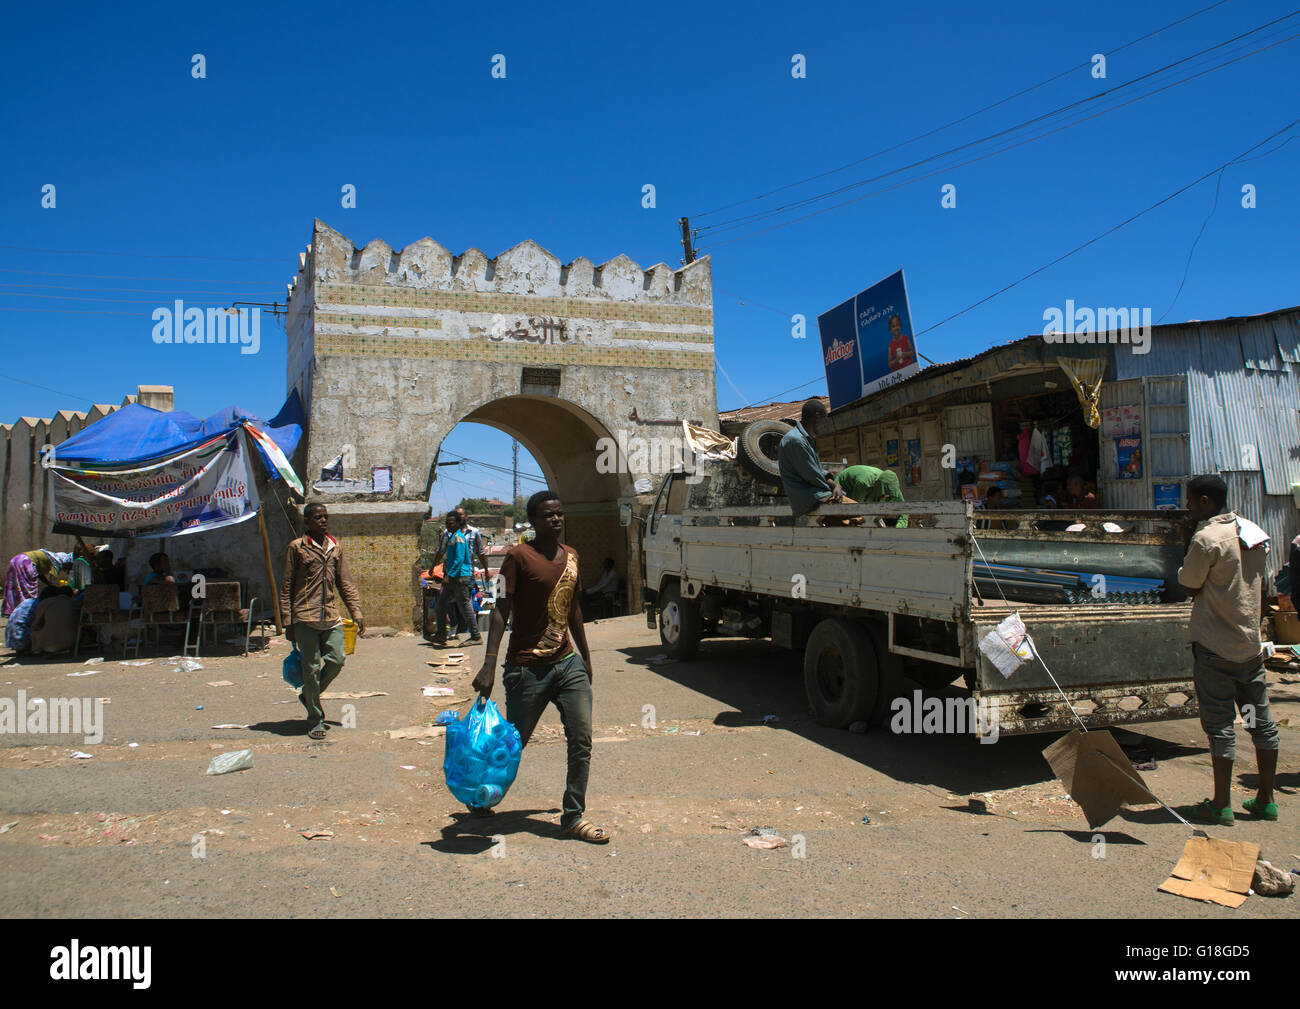 The ancient entrance gate of the old town, Harari region, Harar, Ethiopia Stock Photo